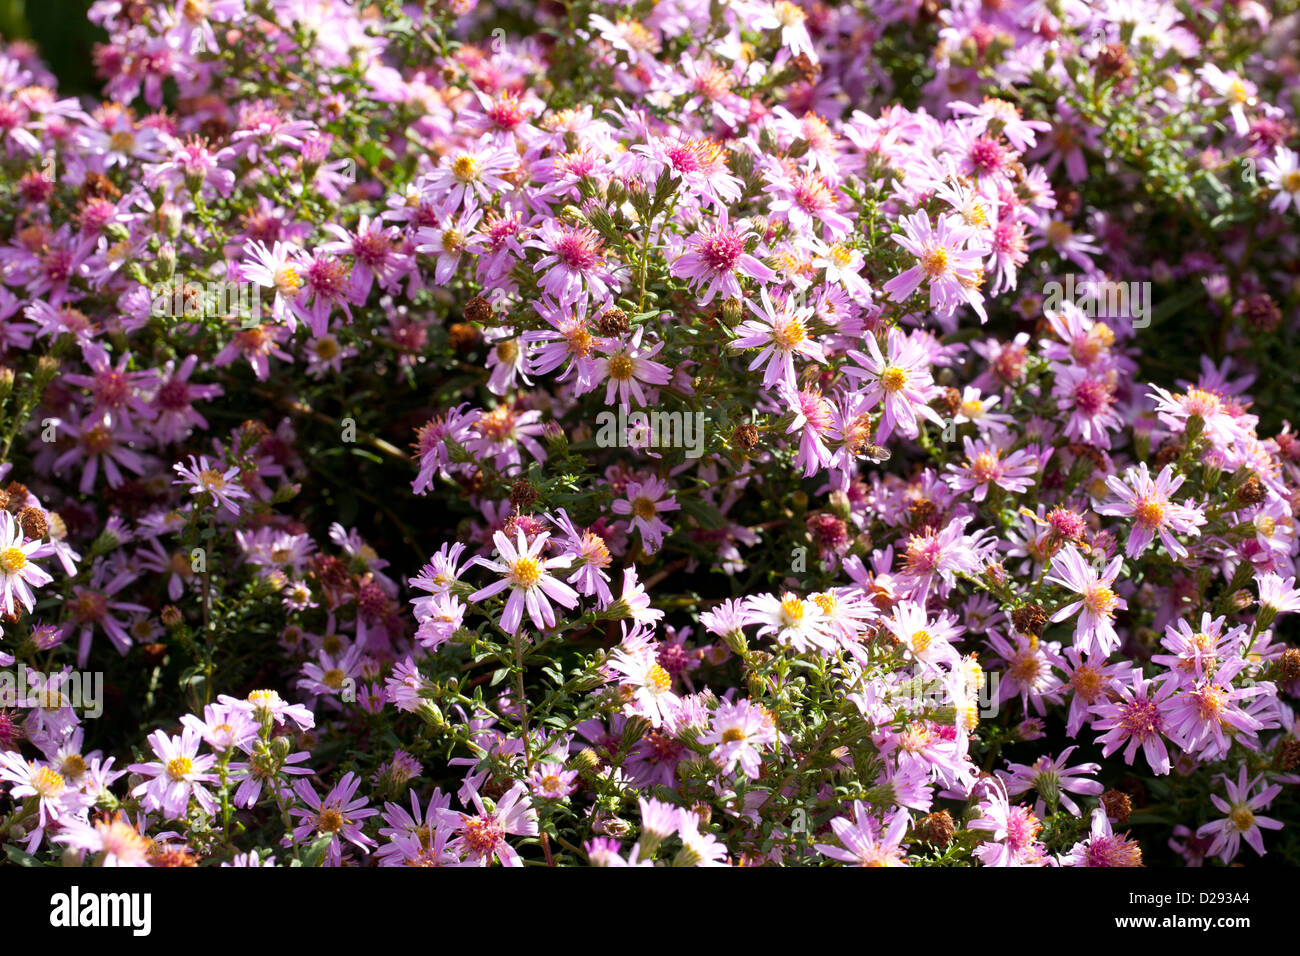 Aster x lateriflorus 'Coombe Fishacre' flowering in a garden. Powys, Wales. October. Stock Photo